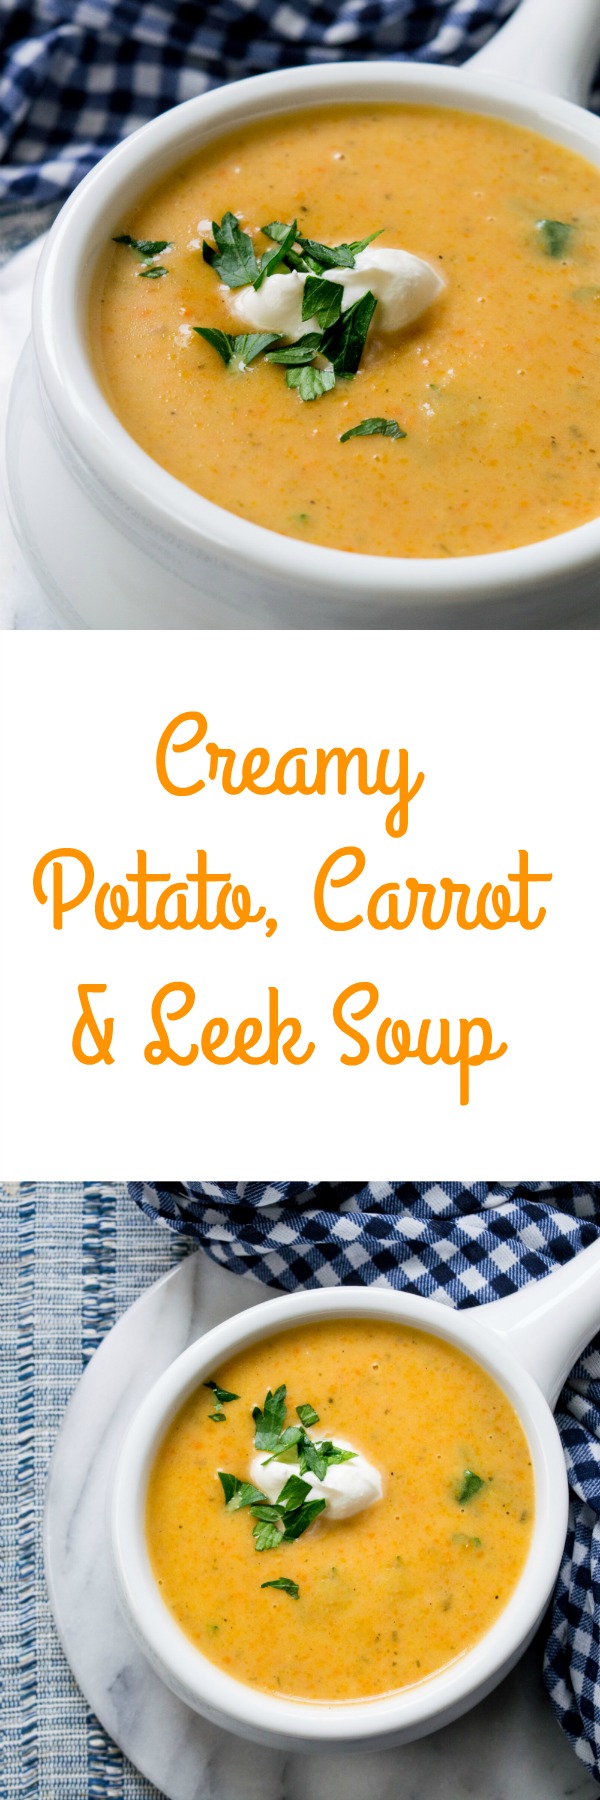 Creamy Potato, Carrot and Leek Soup tastes great, is ready in minutes and is the perfect dinnertime solution for Fall and Winter!